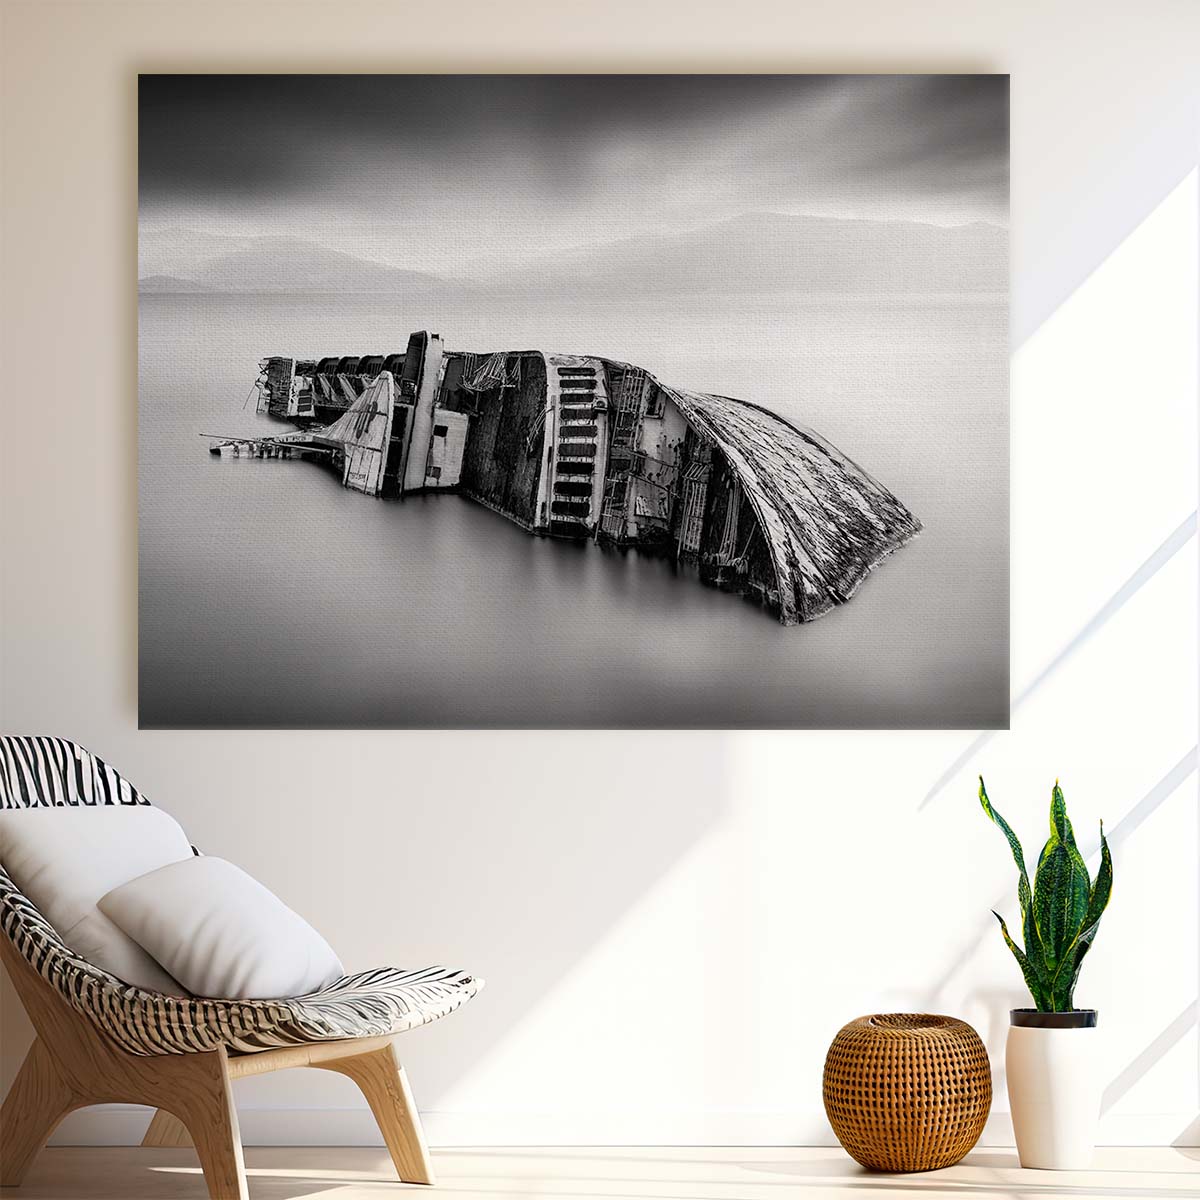 Silky Seascape Shipwreck Monochrome Wall Art by Luxuriance Designs. Made in USA.